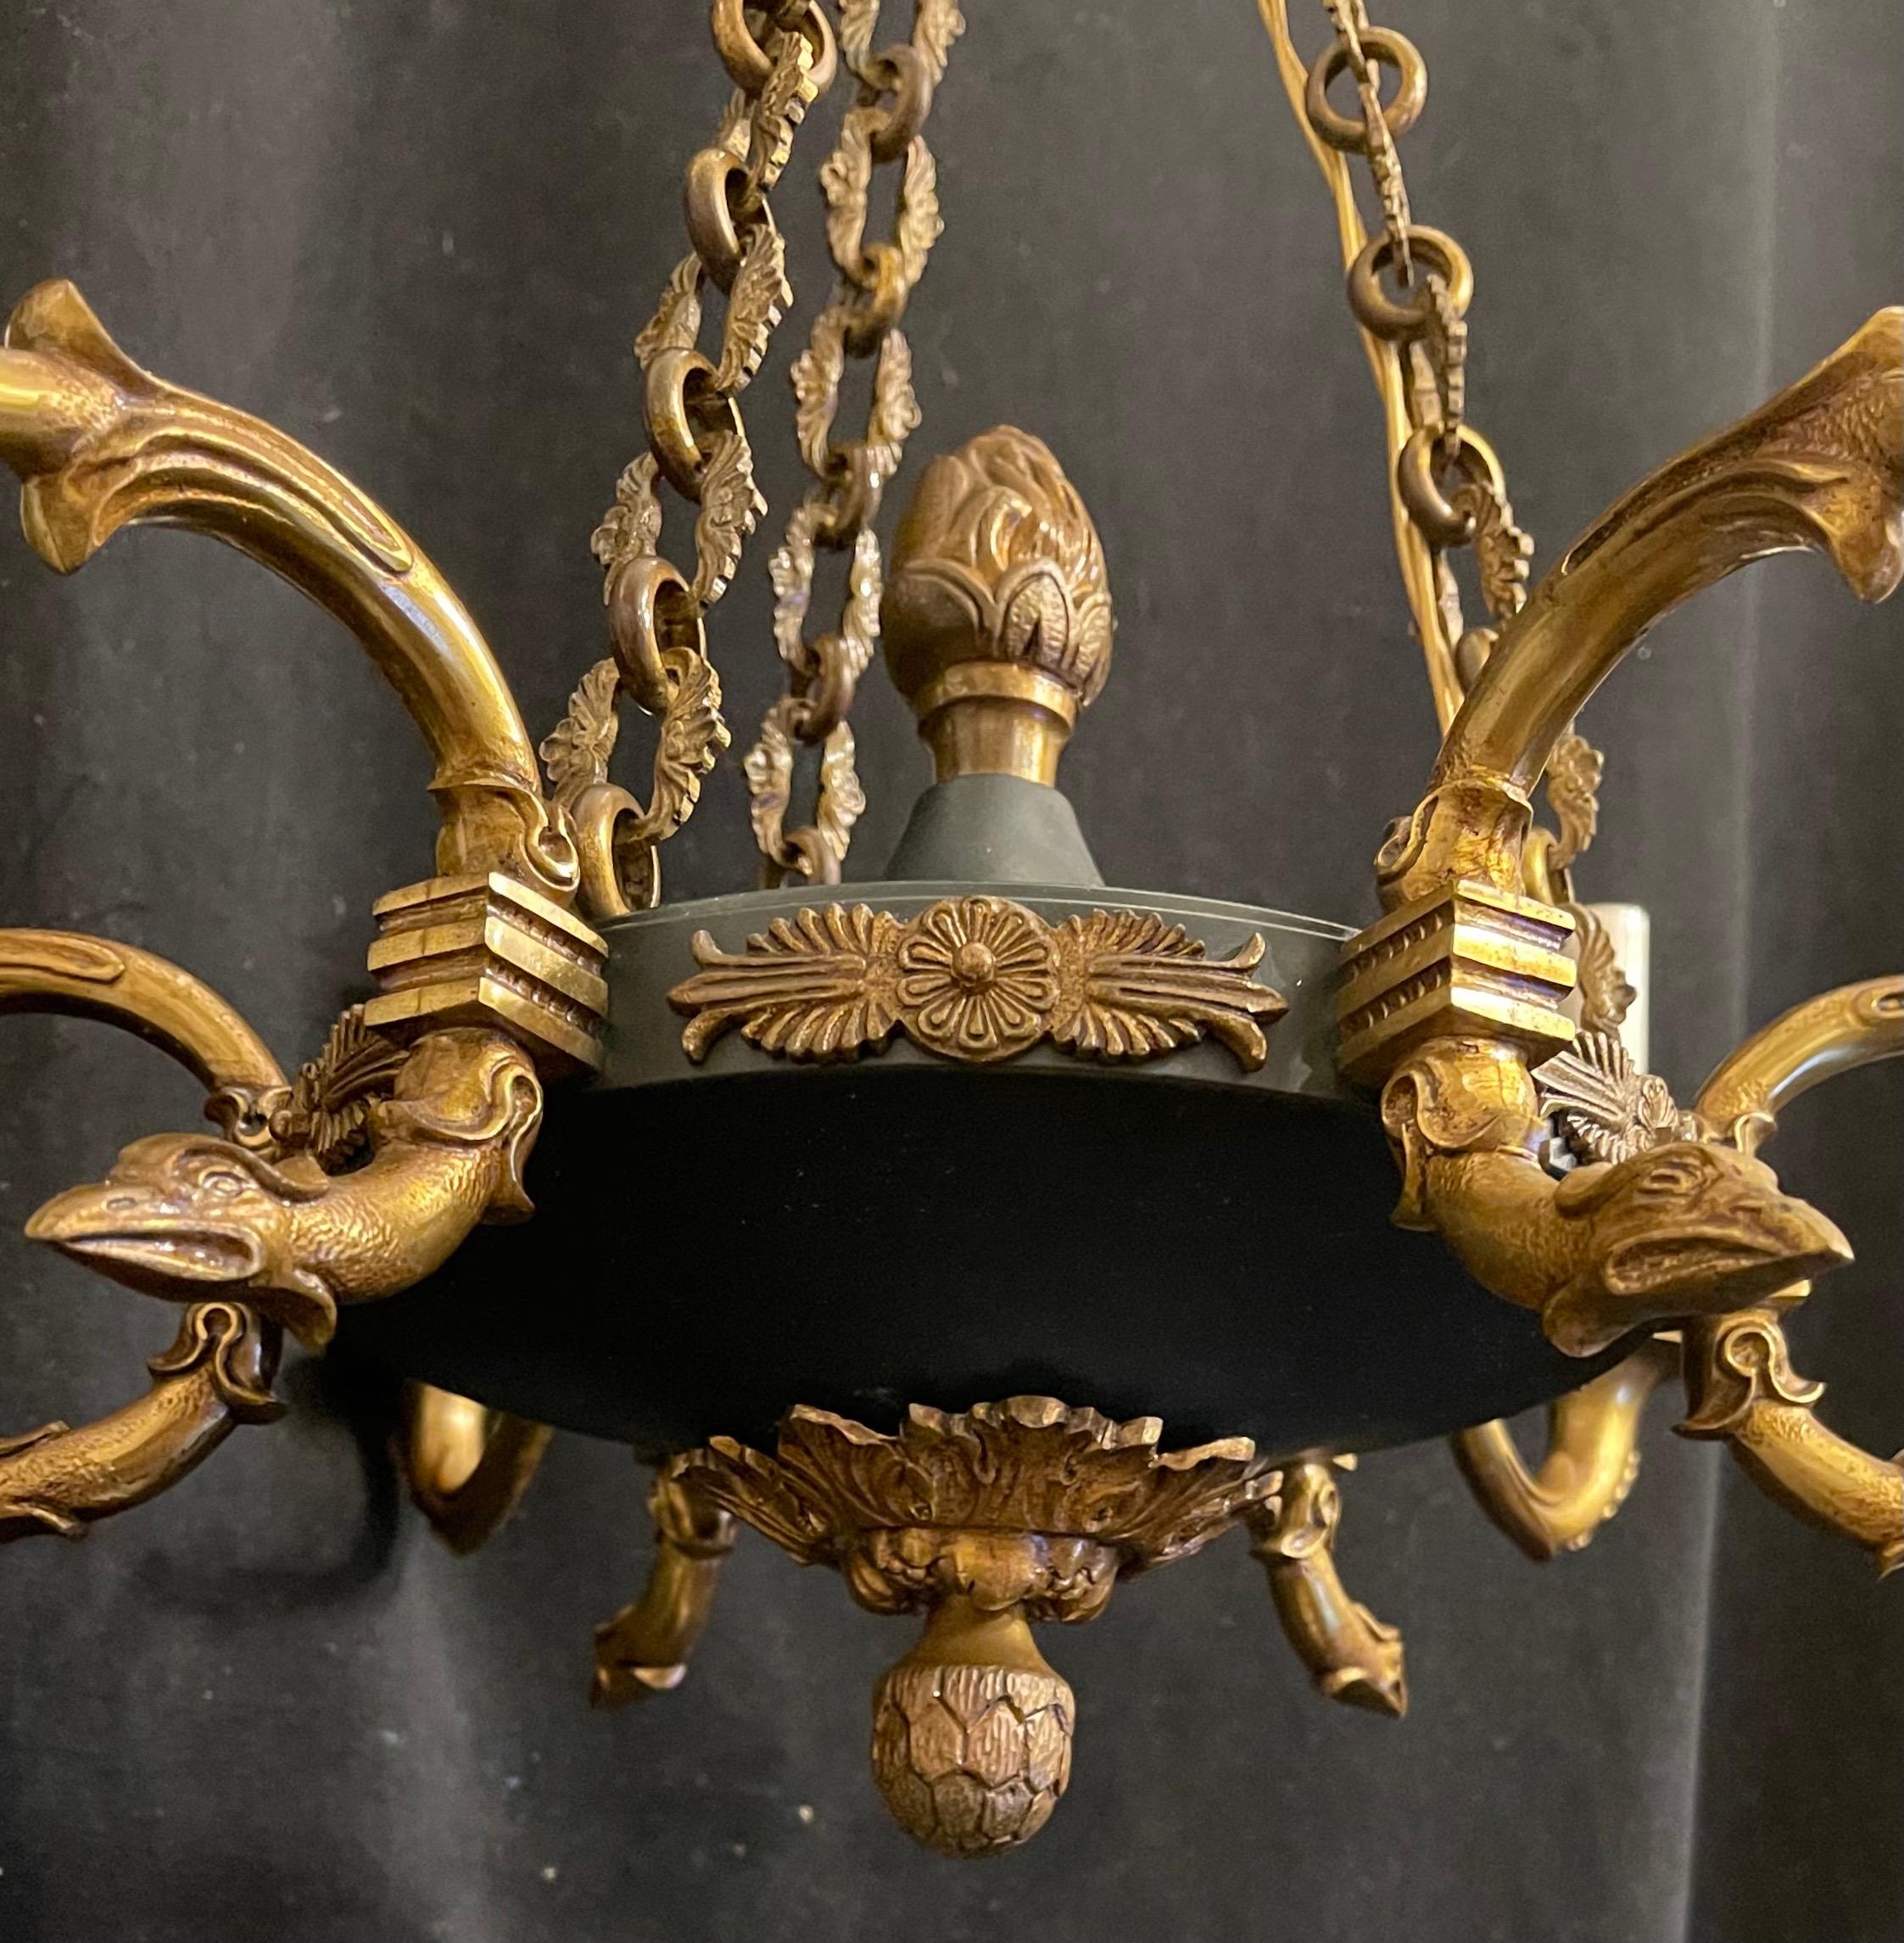 Wonderful French Empire Neoclassical Patinated Ormolu Bronze Chandelier Fixture 1